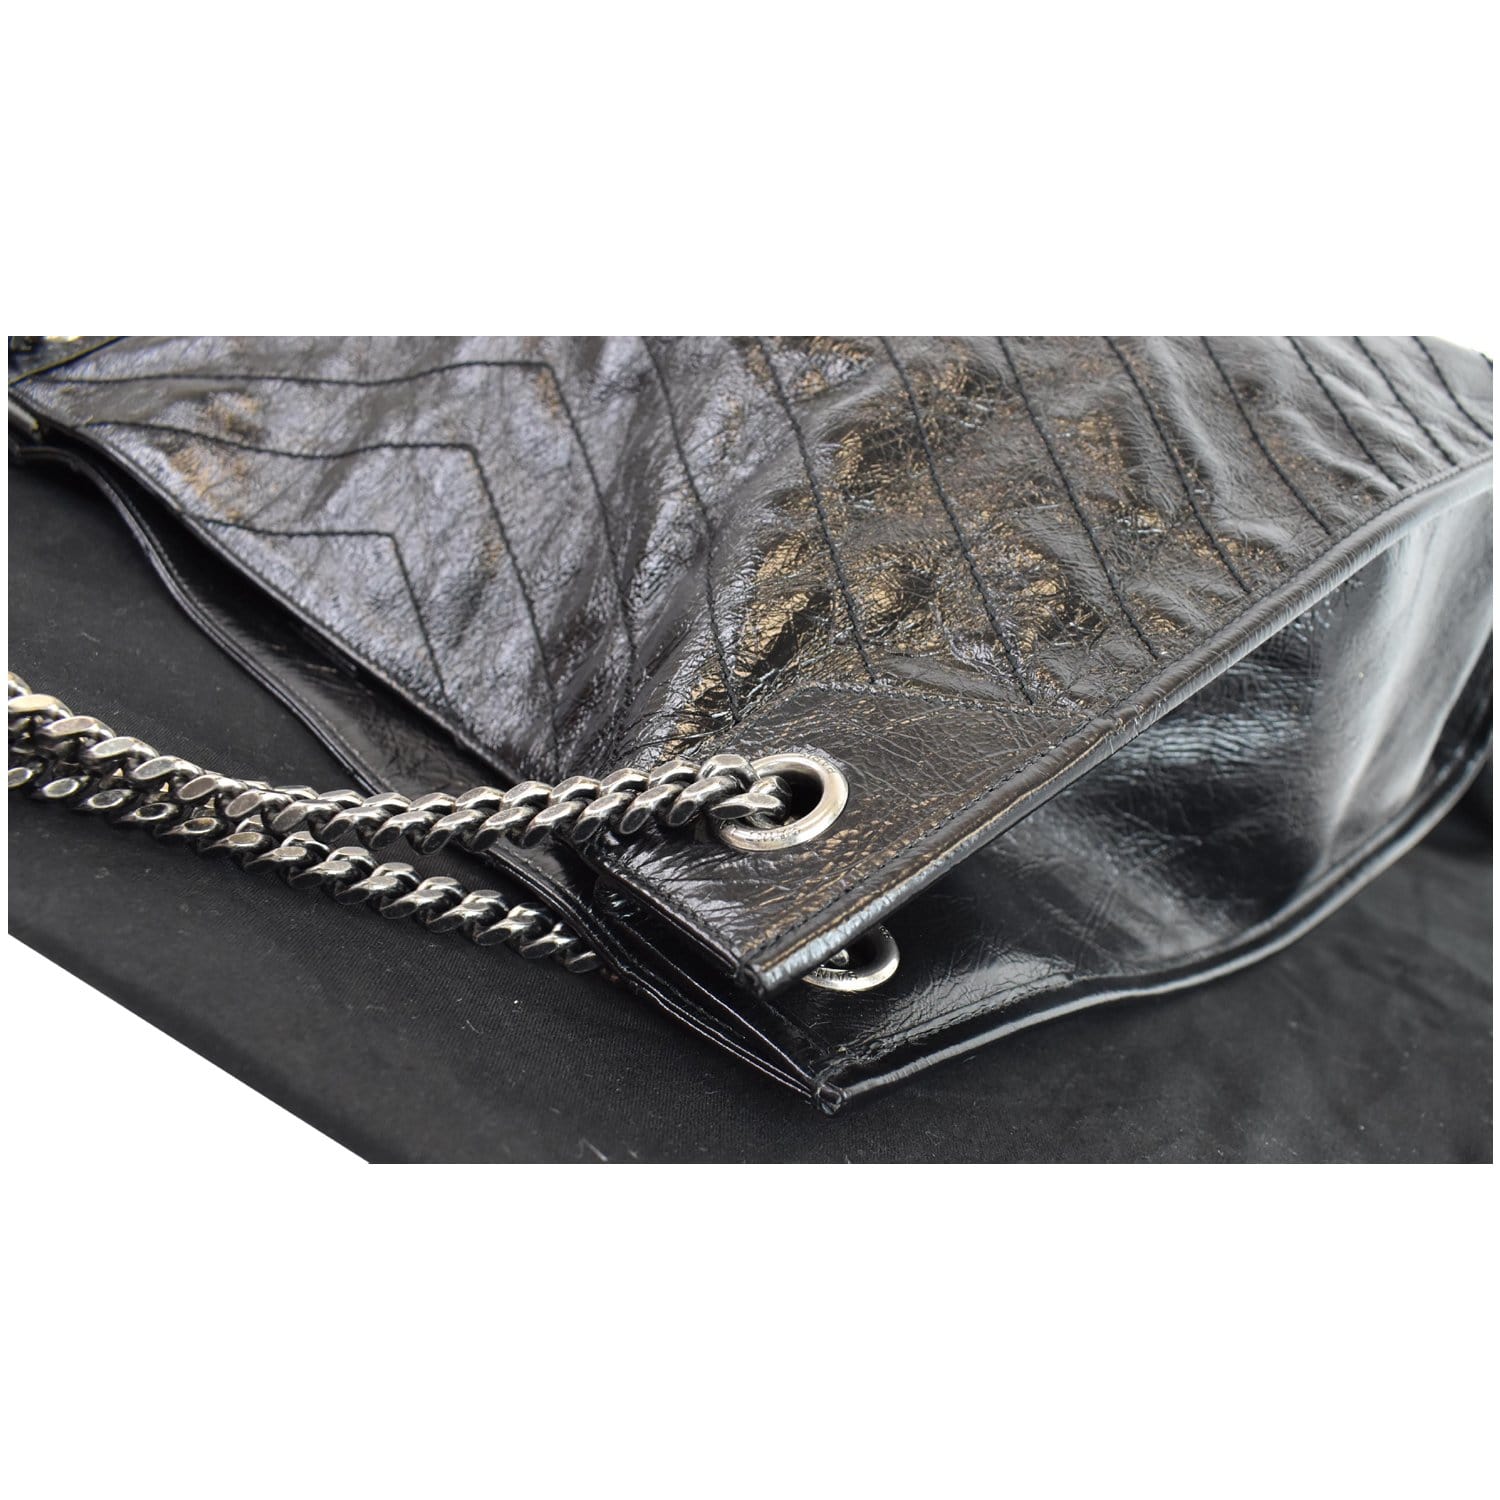 BERKIN Designer Black Leather Tote Bag Luxury Handbag For Women With  Gold/Silver Hardware From Likebags, $77.1